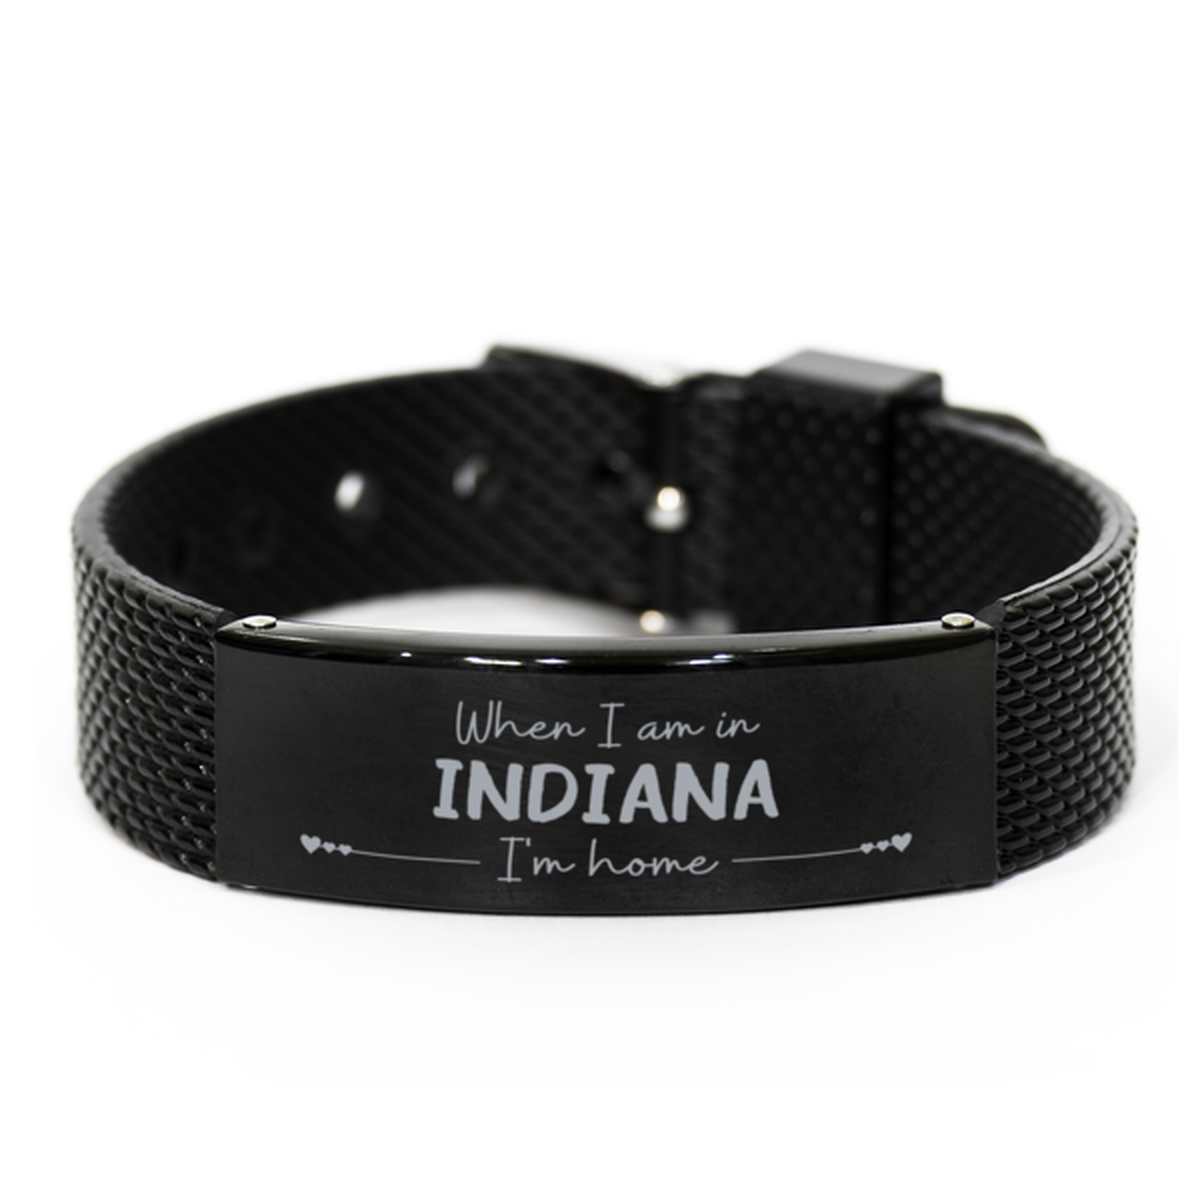 When I am in Indiana I'm home Black Shark Mesh Bracelet, Cheap Gifts For Indiana, State Indiana Birthday Gifts for Friends Coworker